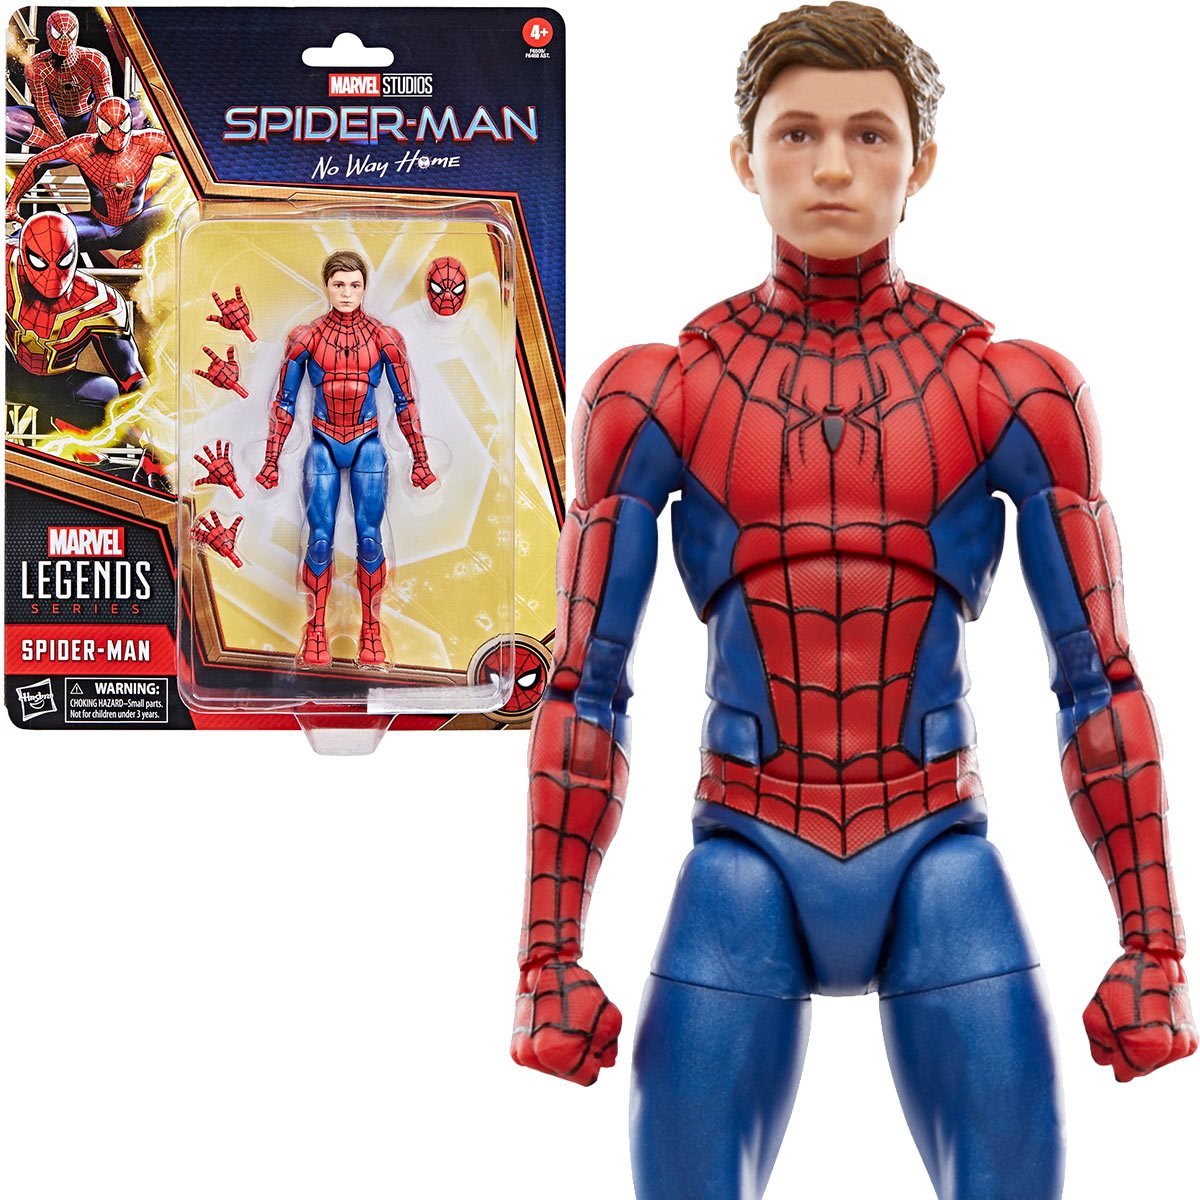 10 Spider-Man themed gifts you can still get before Christmas - CNET